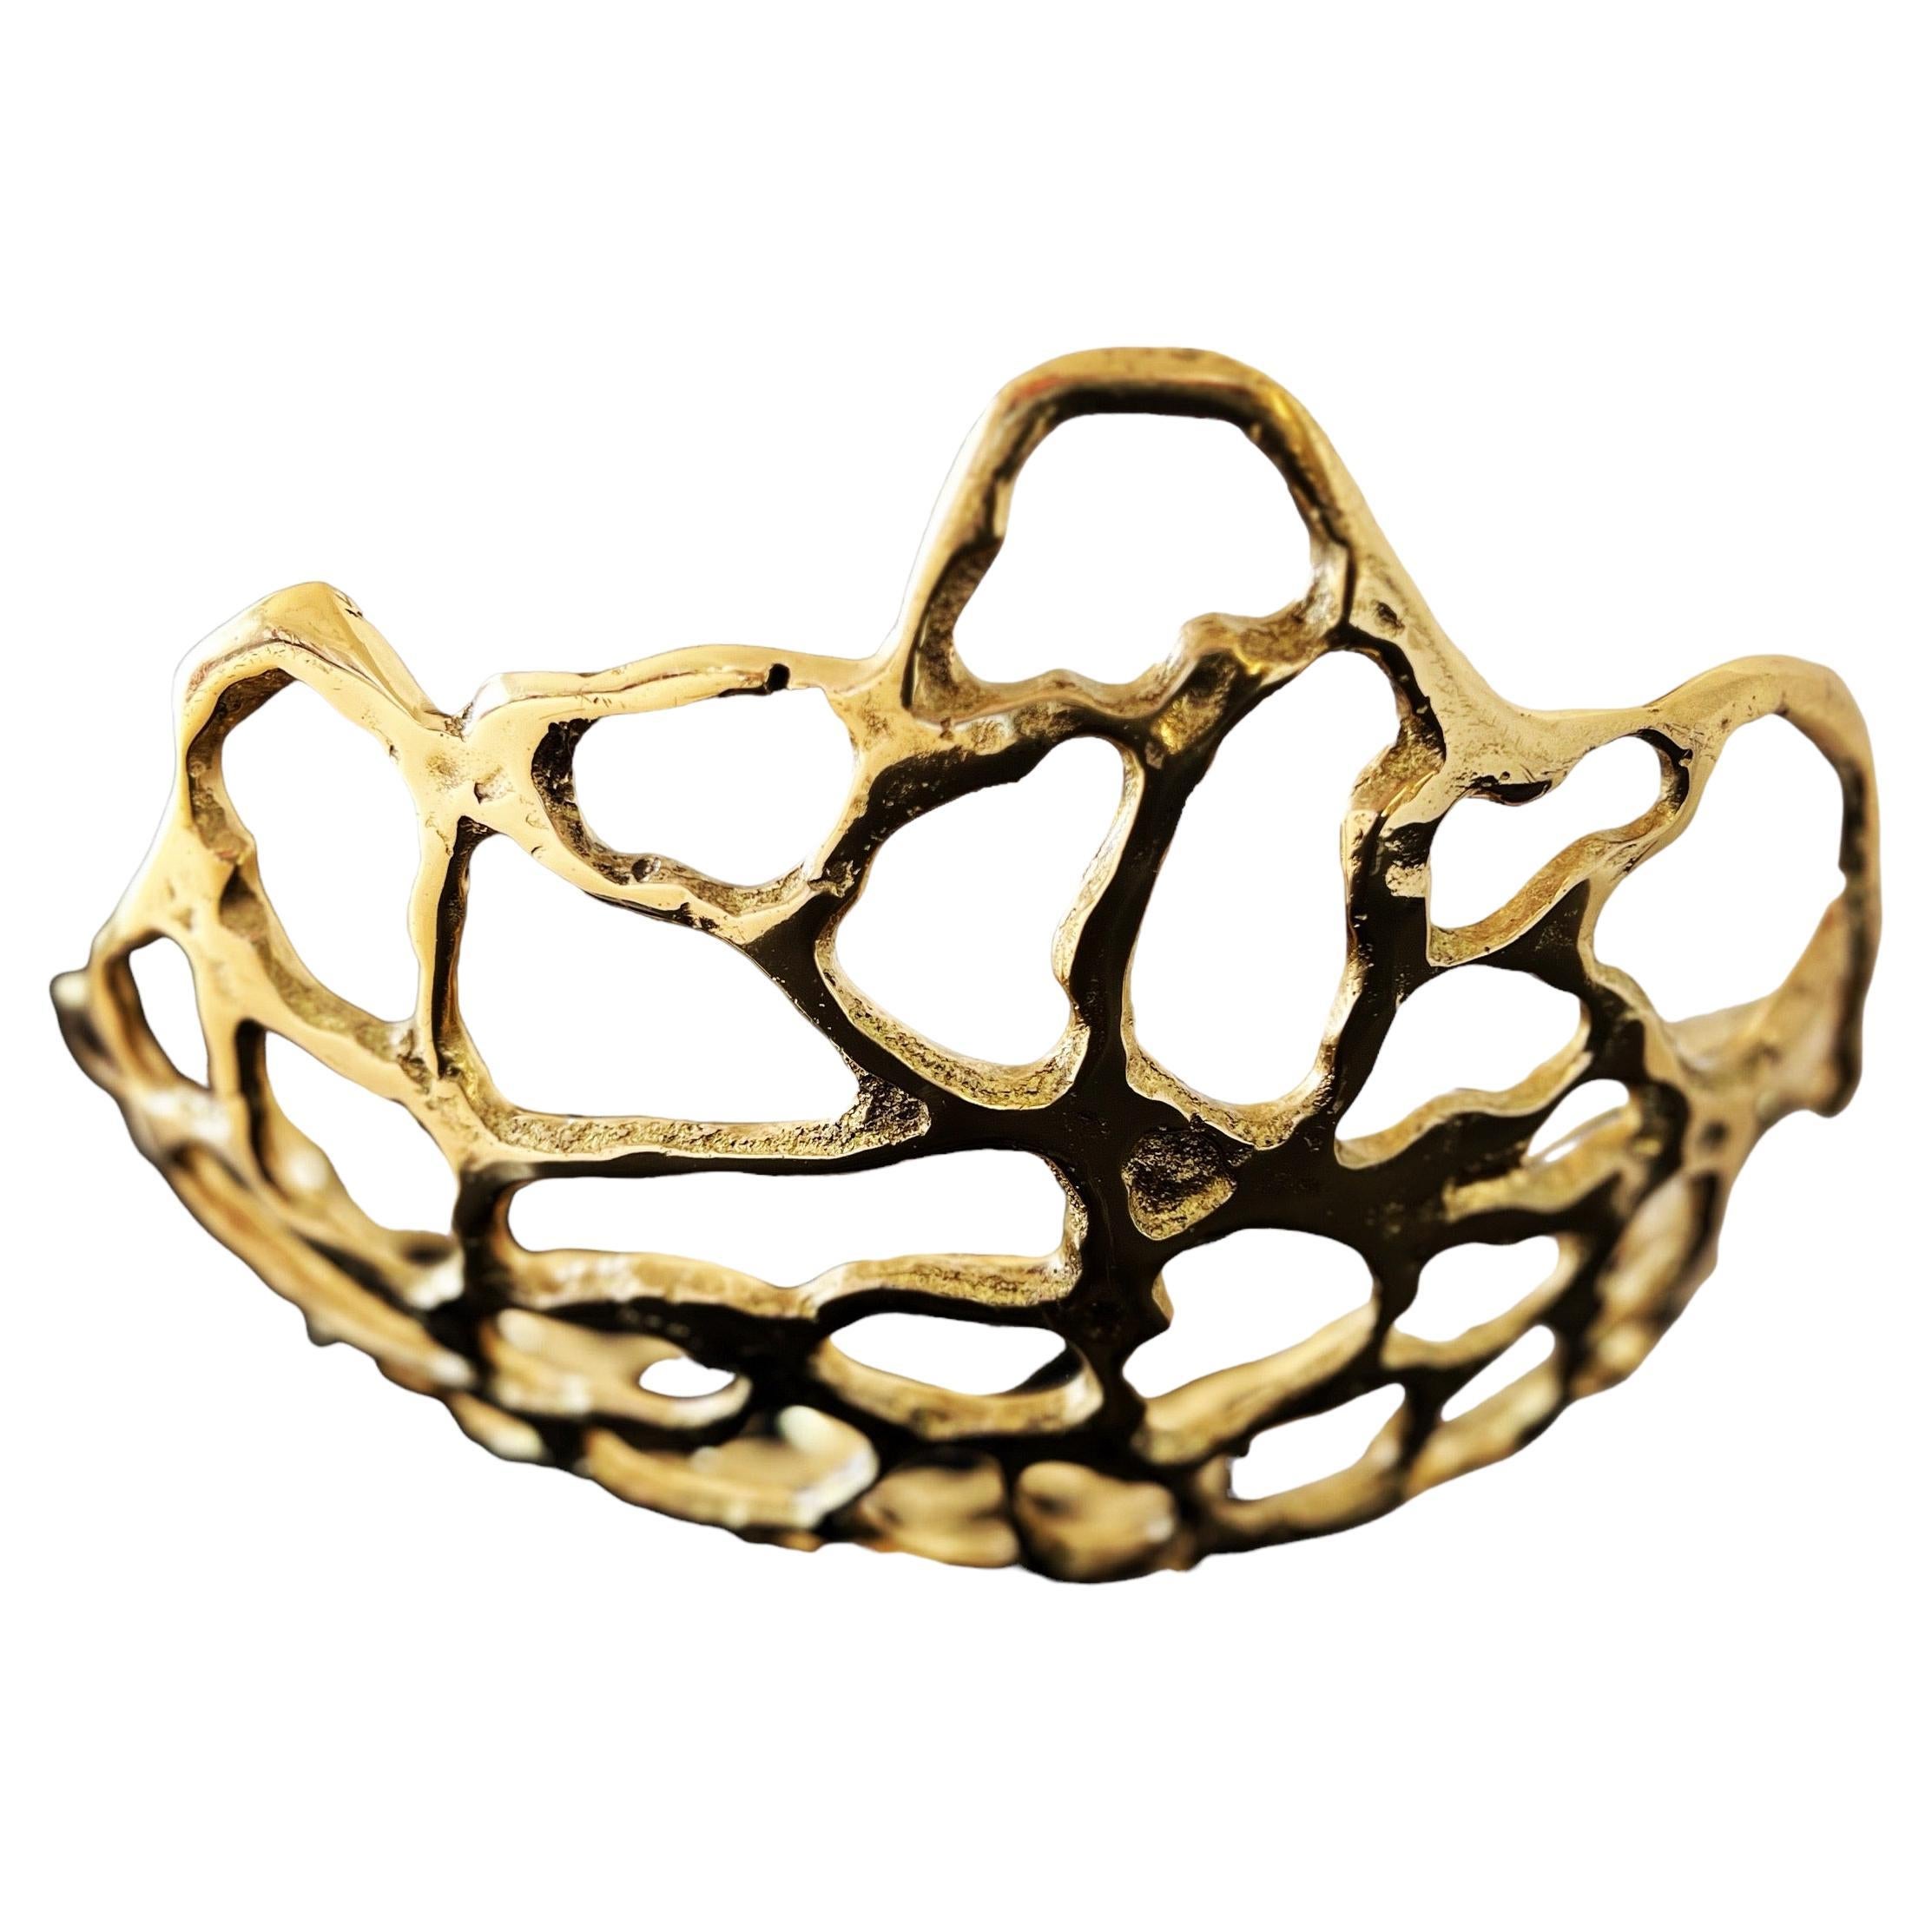 The decorative Brass Fruit Bowl was created by David Marshall, it is made of  sand cast brass.
Handmade, mounted and finished in our foundry and workshop in Spain from recycled materials.
Certified authentic by the Artist David Marshall with his